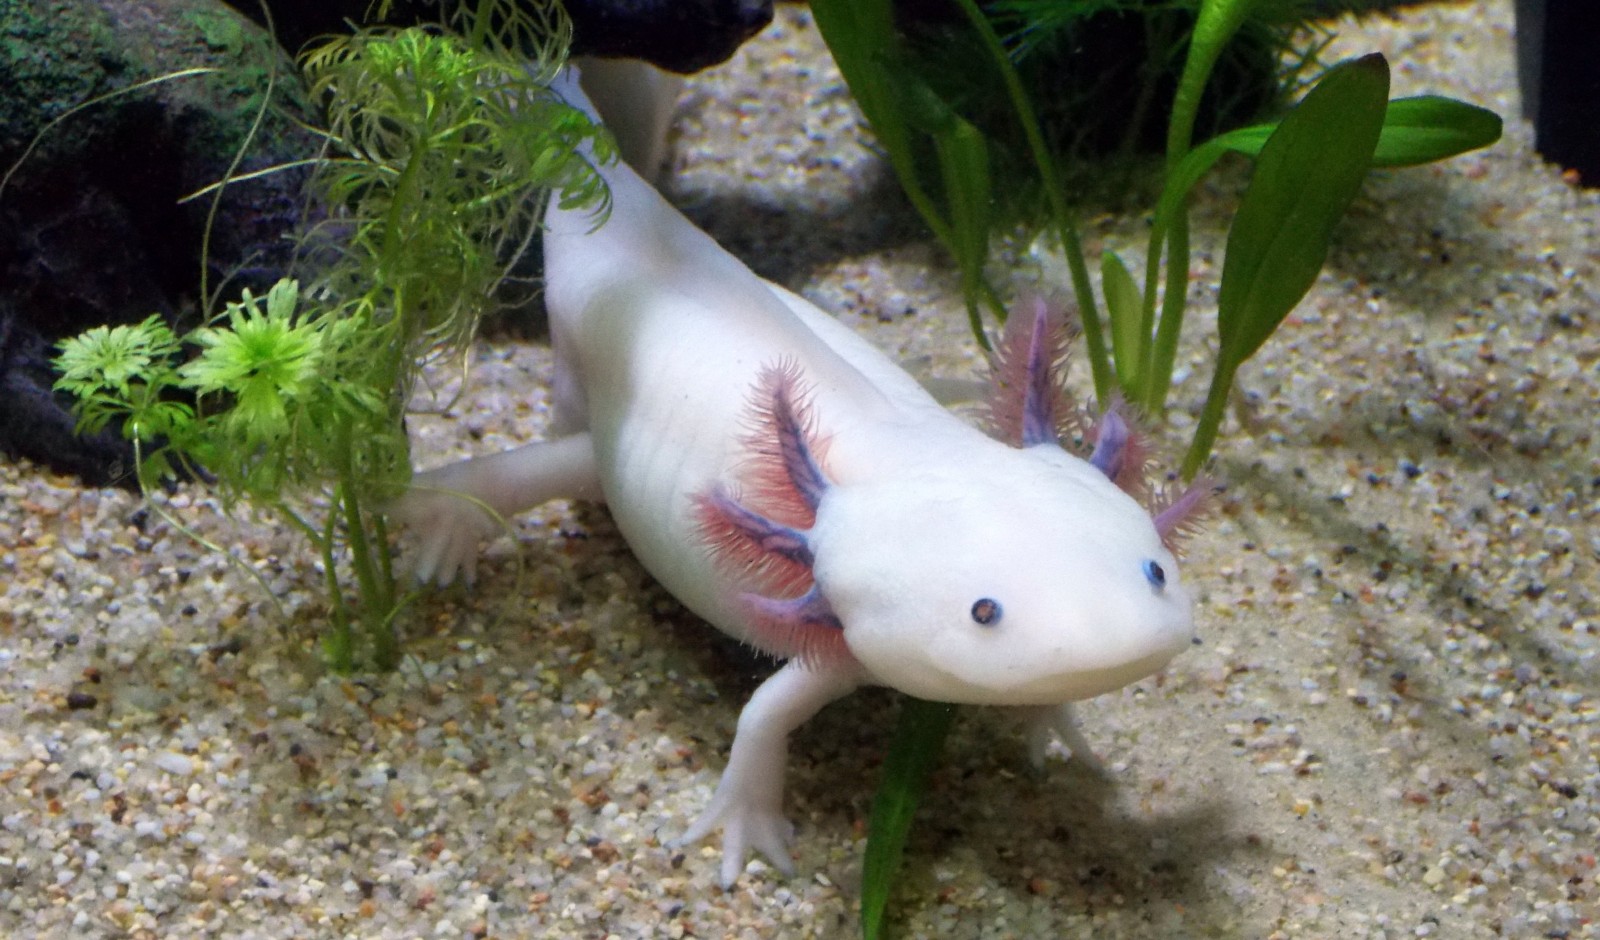 A photo of a white axolotl in a tank, with green aquatic plants.